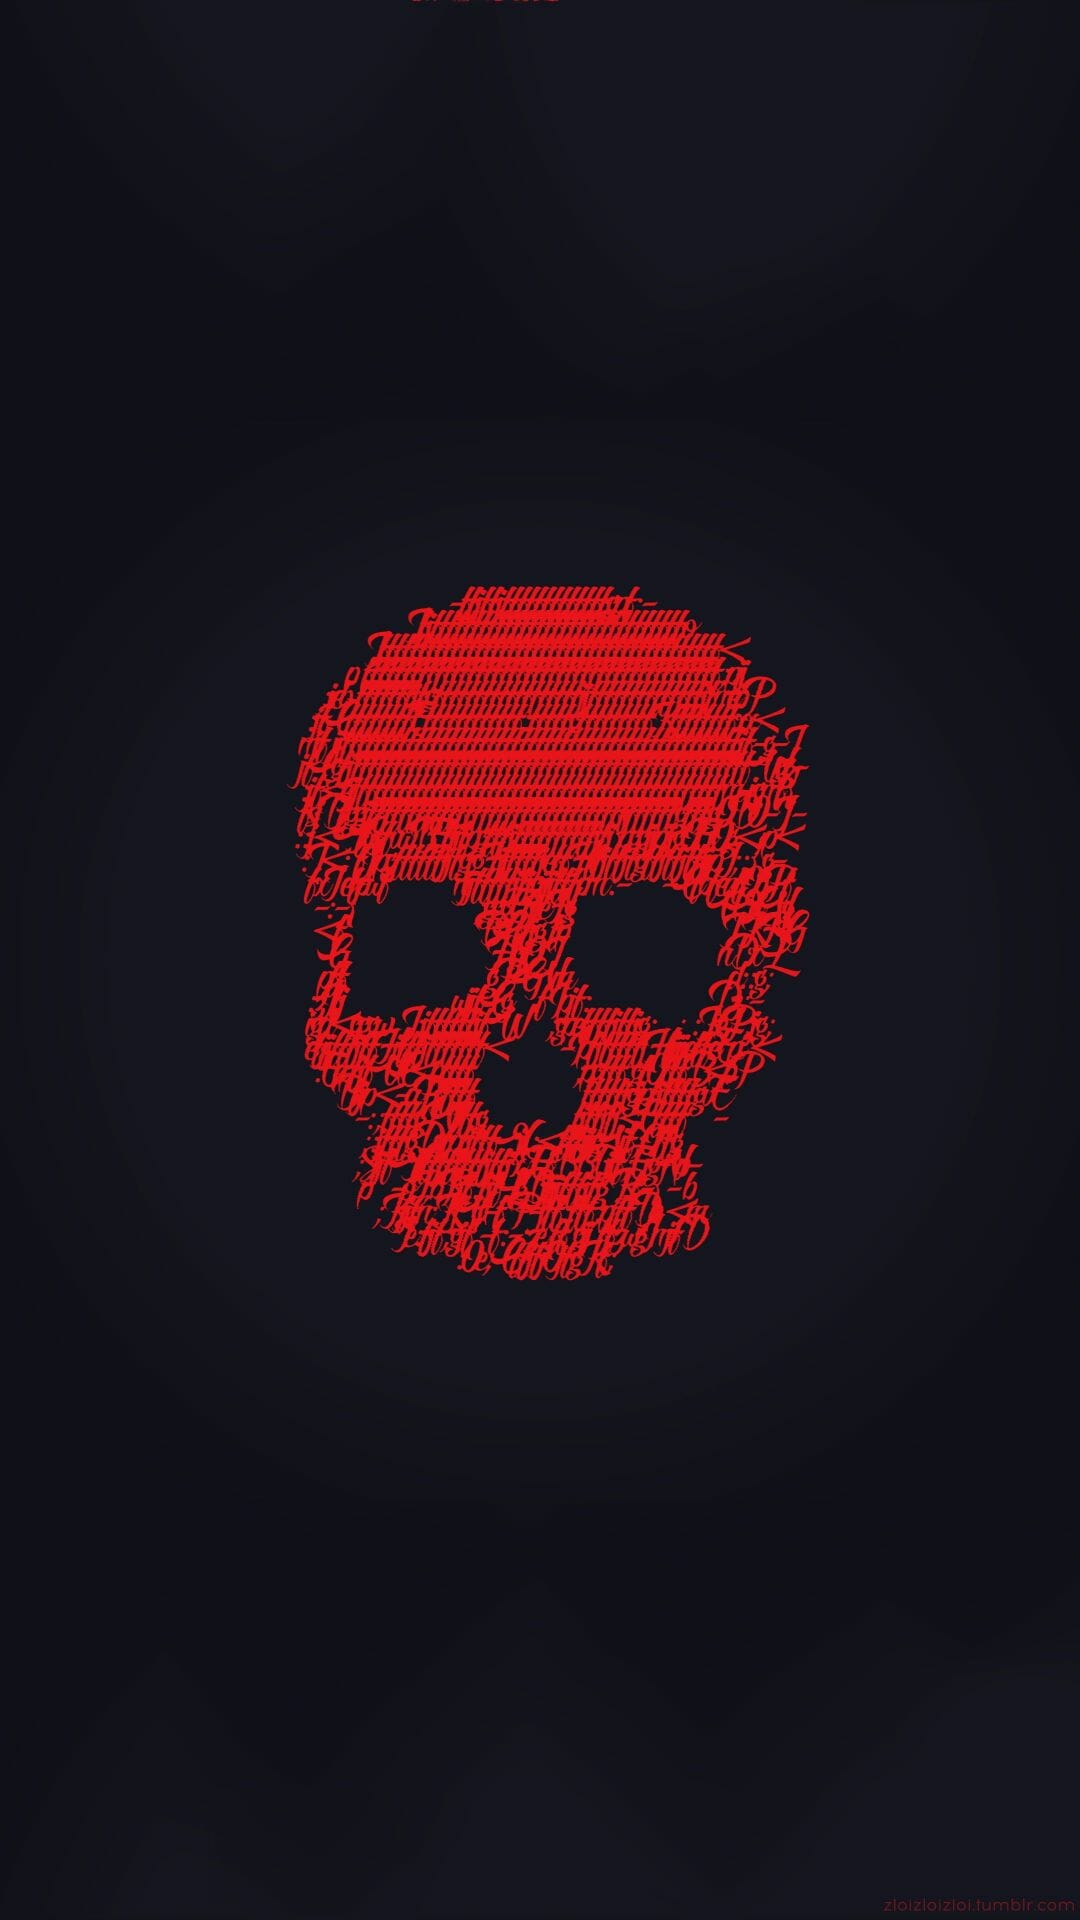 Red and black knitted decor, skull, ASCII art, abstract